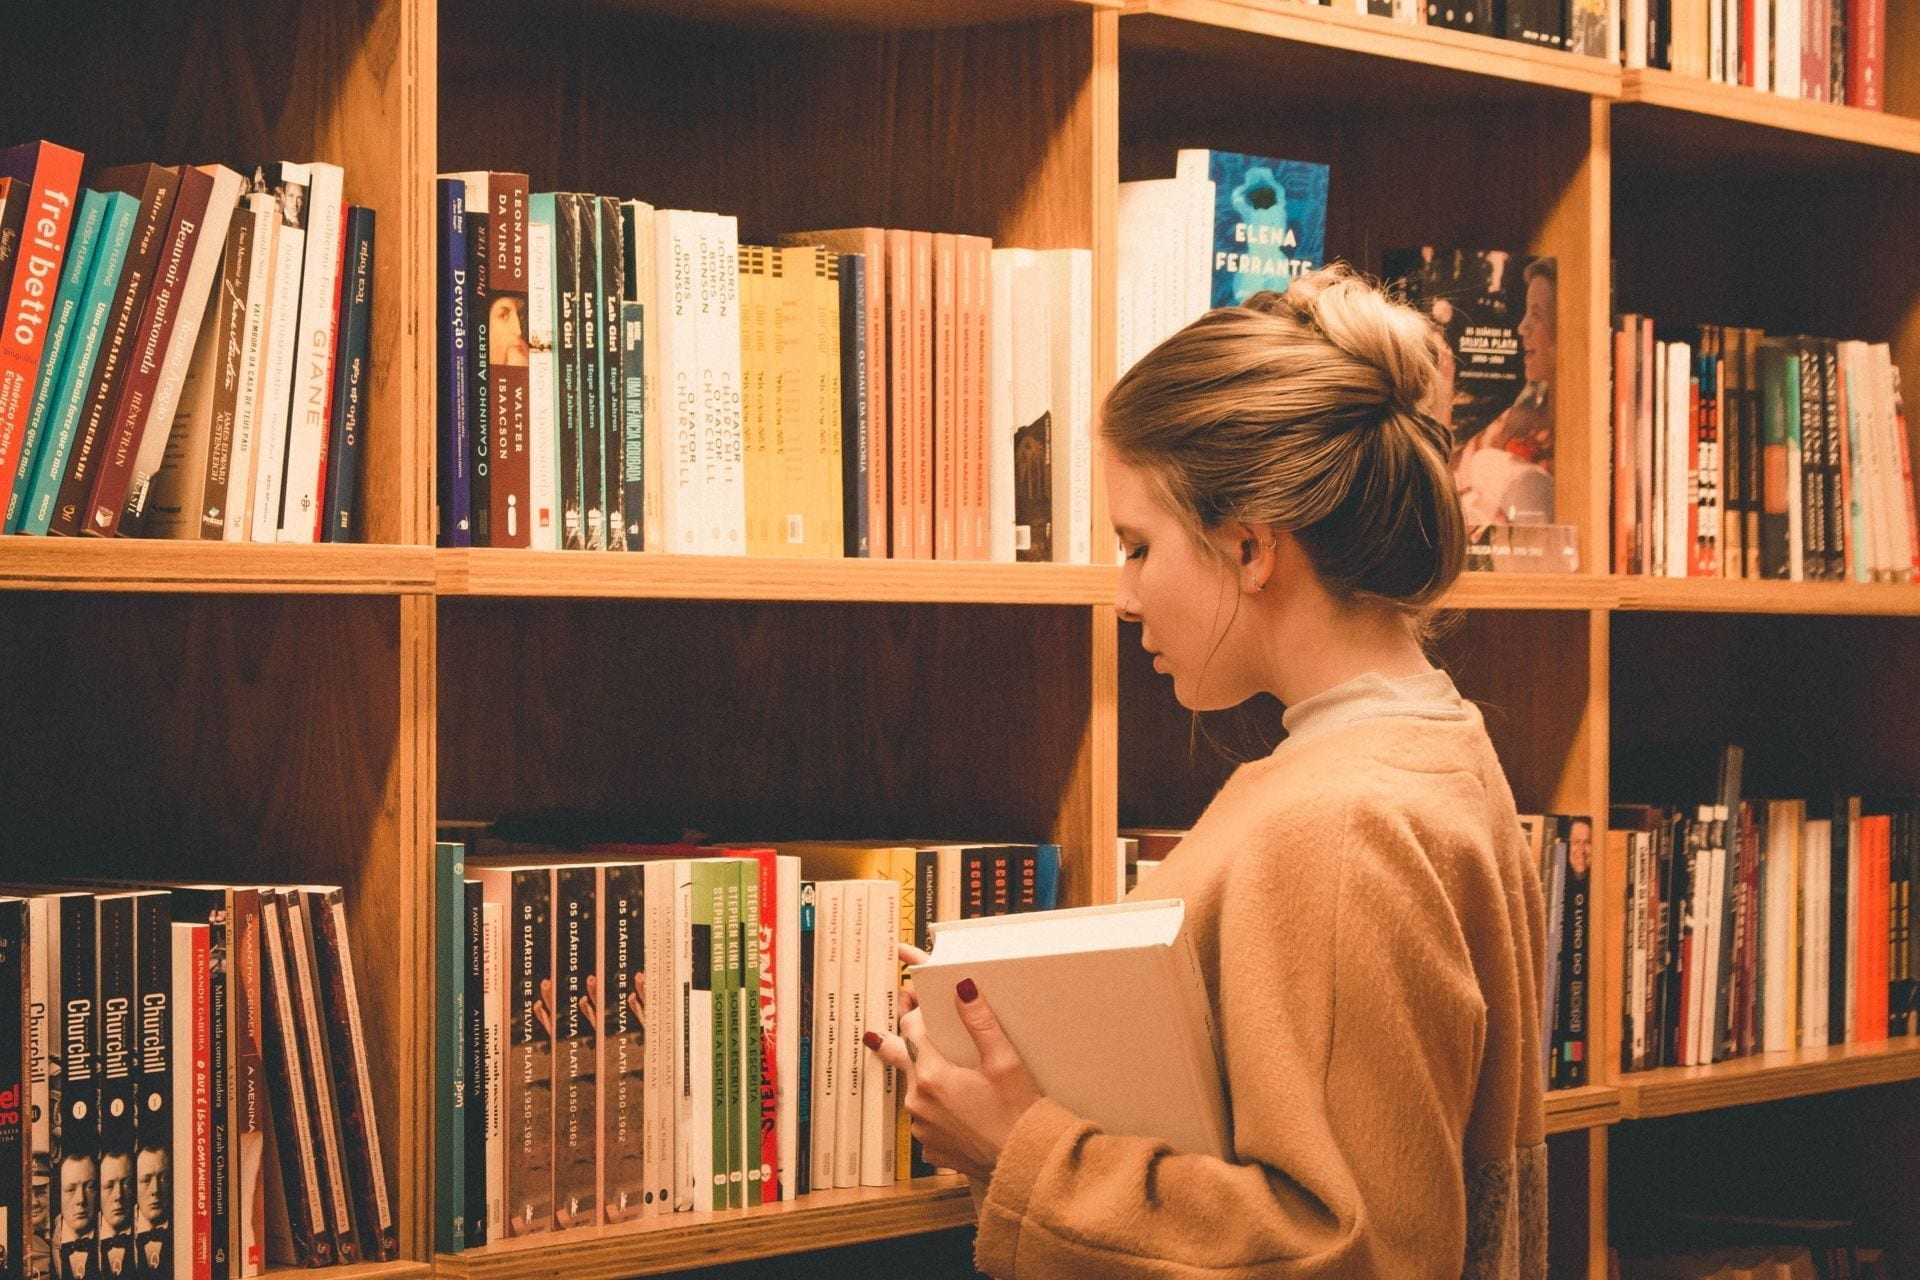 A girl stood in front of a bookshelf full of books, holding a book